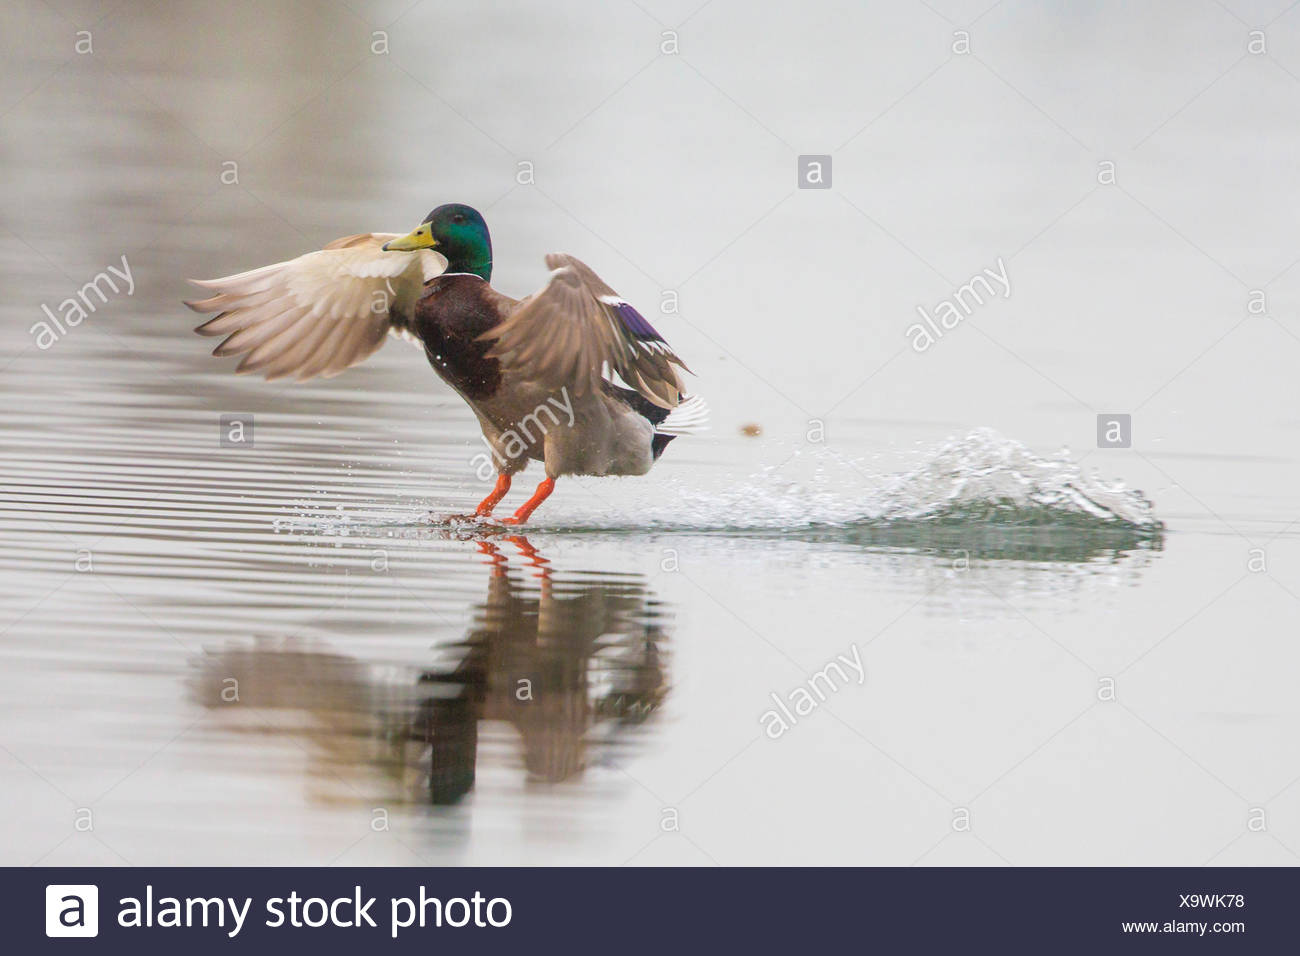 Male Duck Landing On Water High Resolution Stock Photography And Images Alamy,Best Laminate Flooring For Bathroom